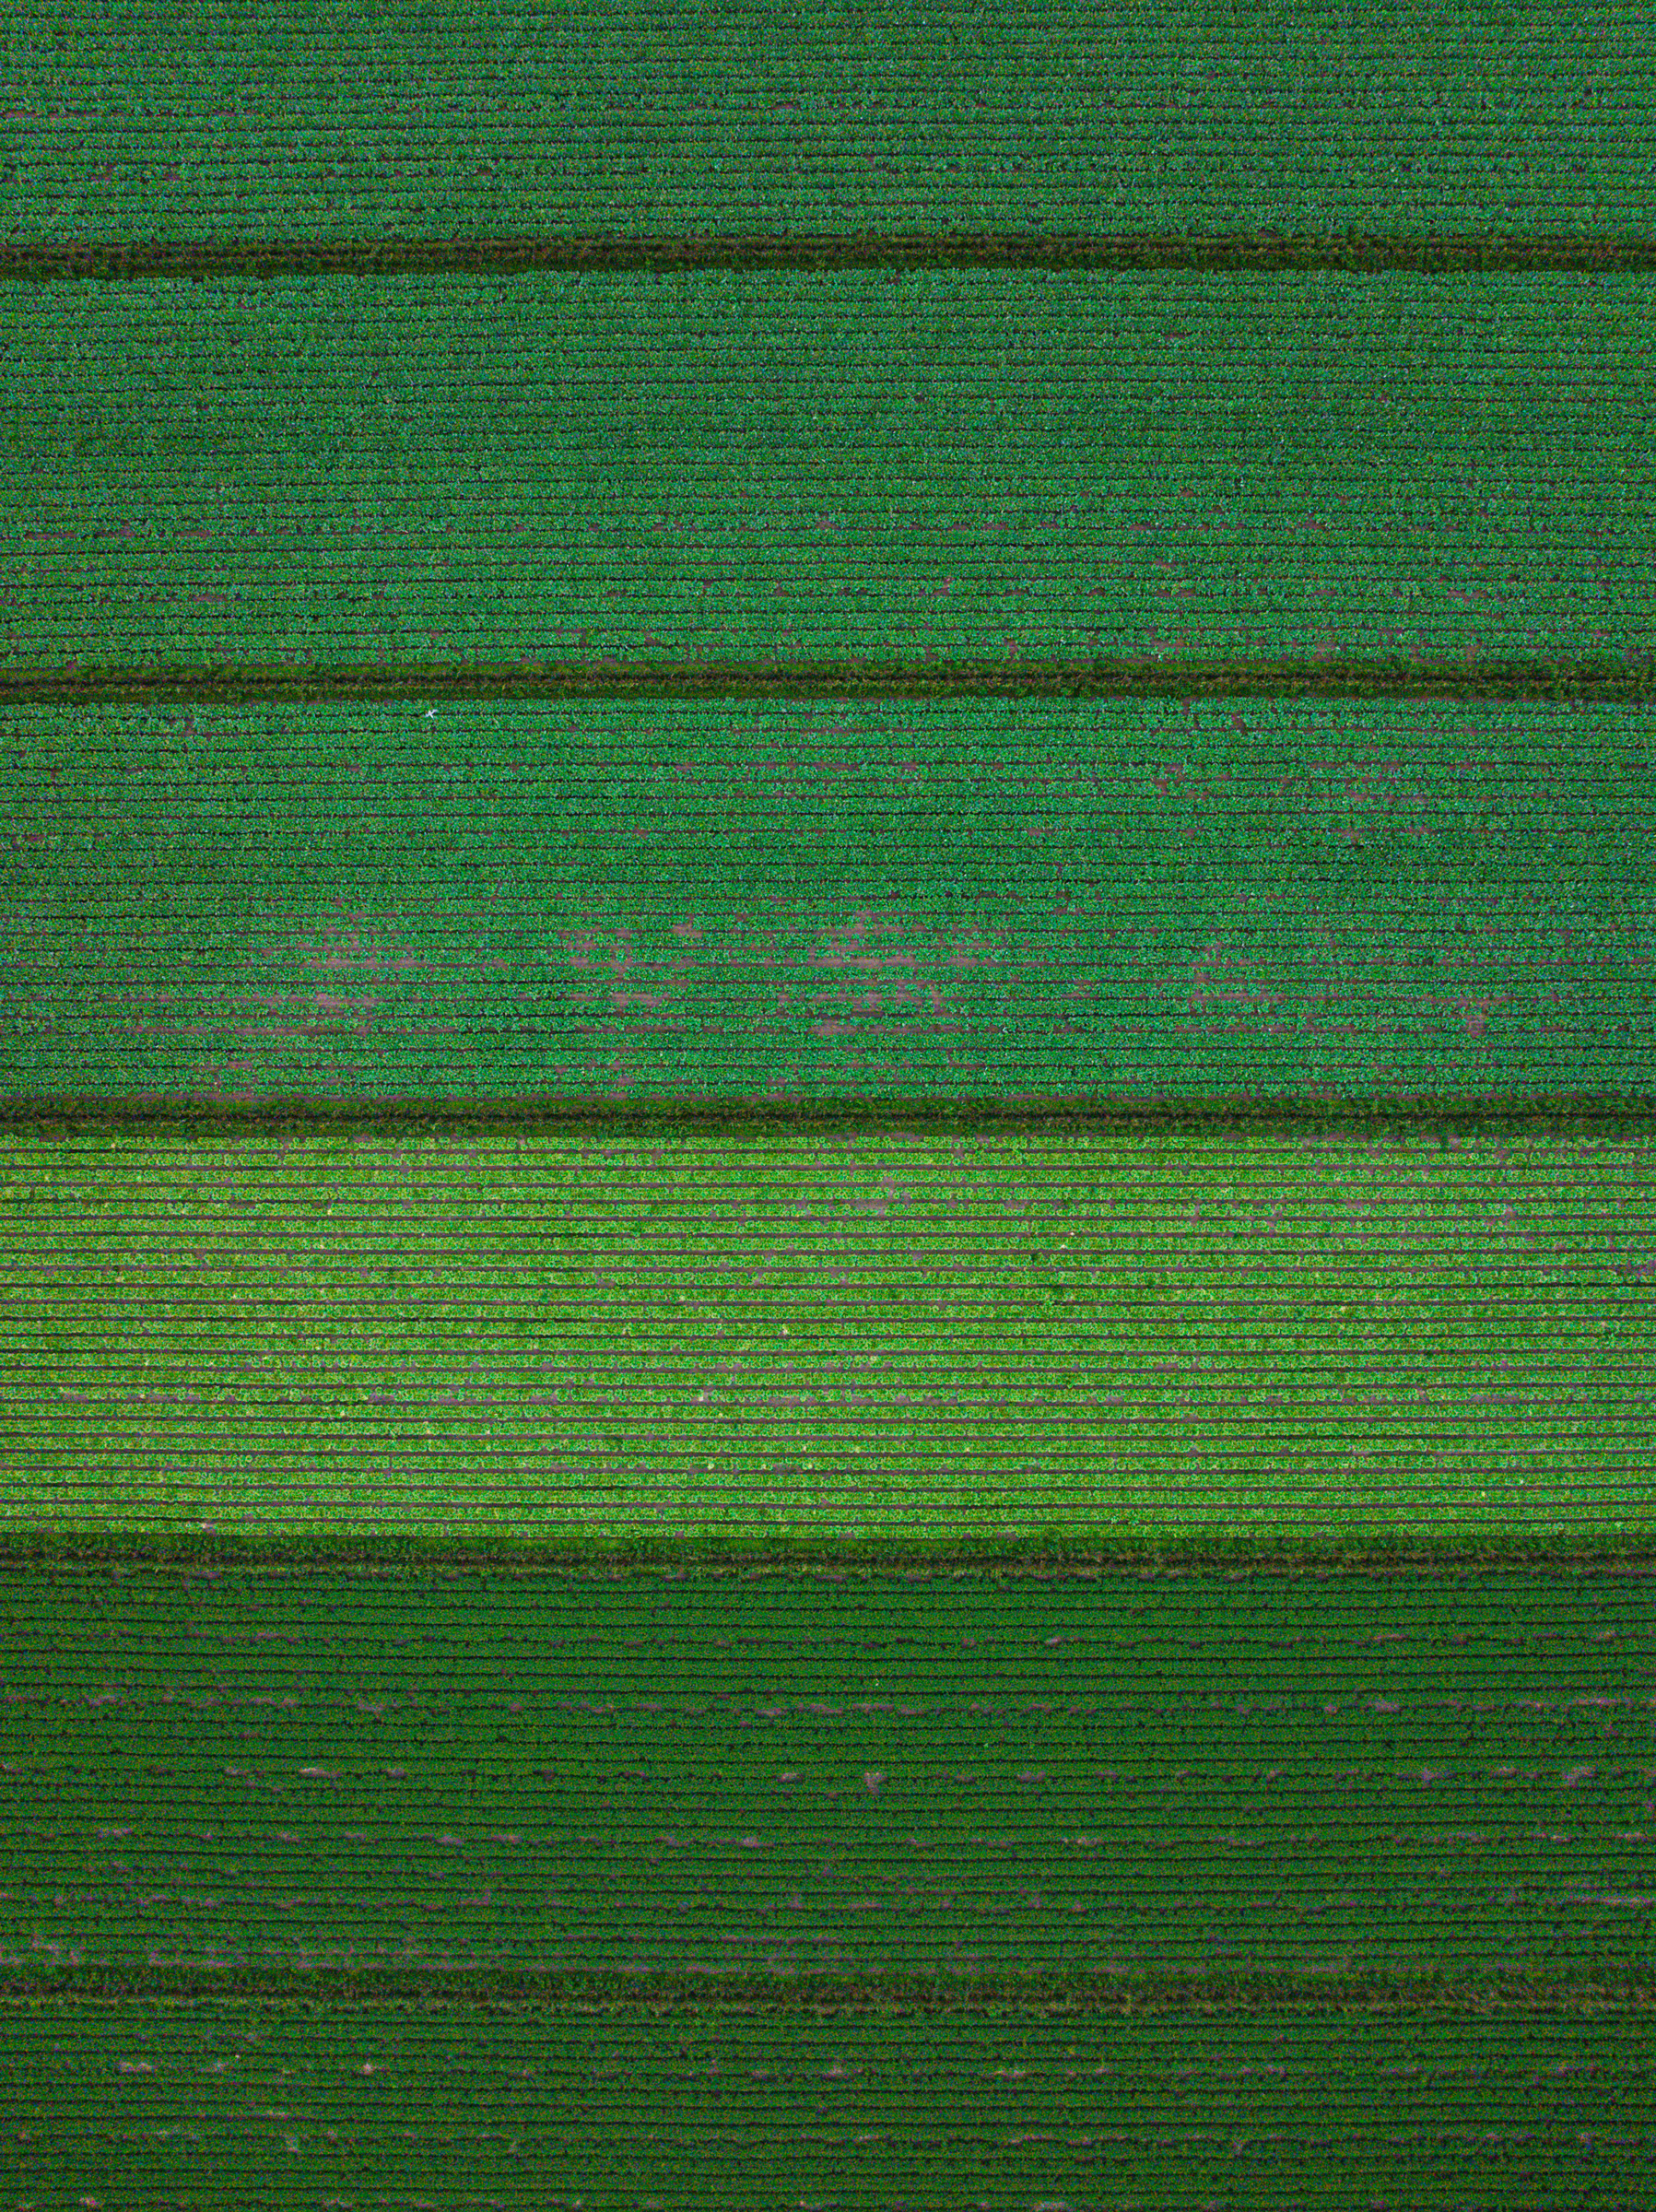 Gradations in green looking down over fields of produce at Little Bear in McAllen, Texas